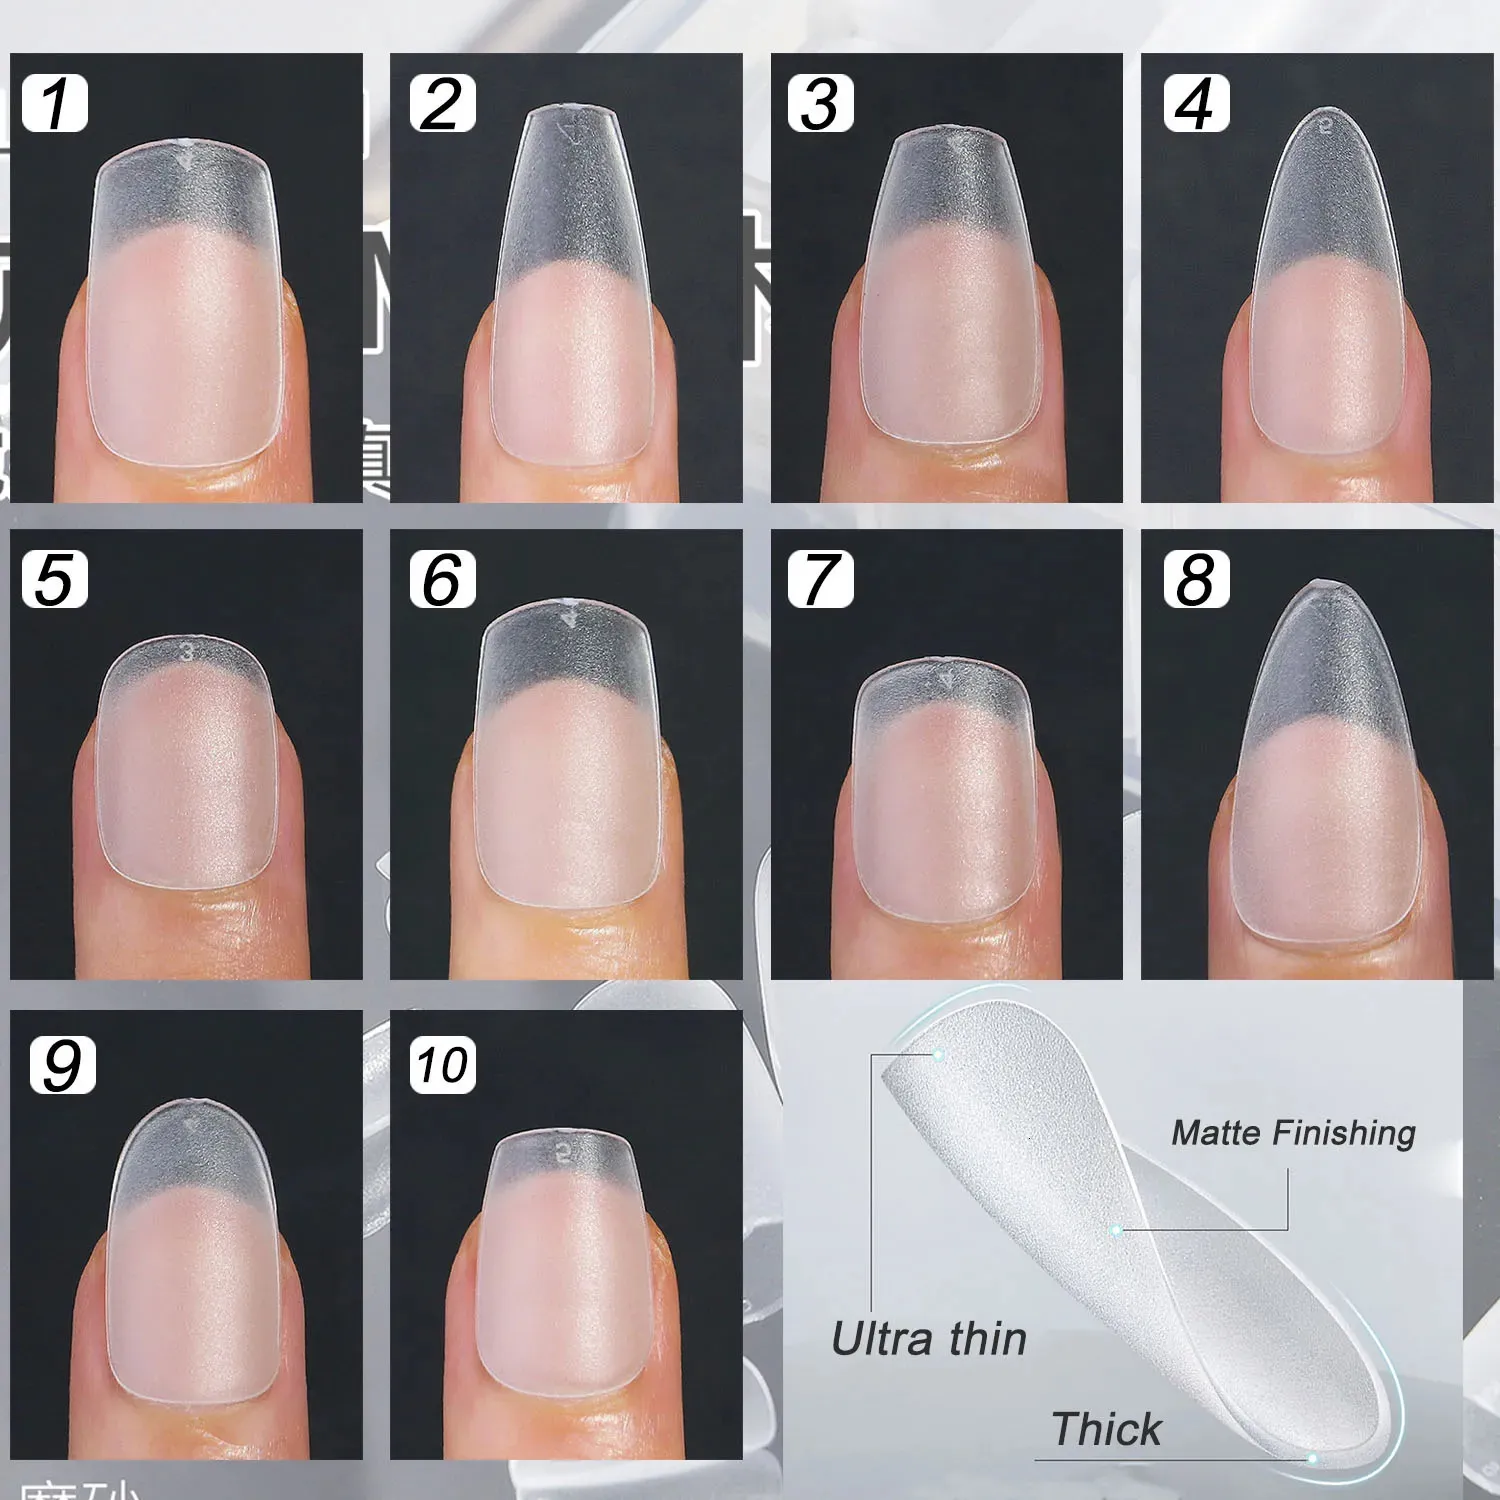 Matte Soft Gel Silver Acrylic Nails Coffin Tracelss Short Coffin Square  Tips For Press On Nail Design With Faux Ombles 230927 From Bao04, $9.9 |  DHgate.Com